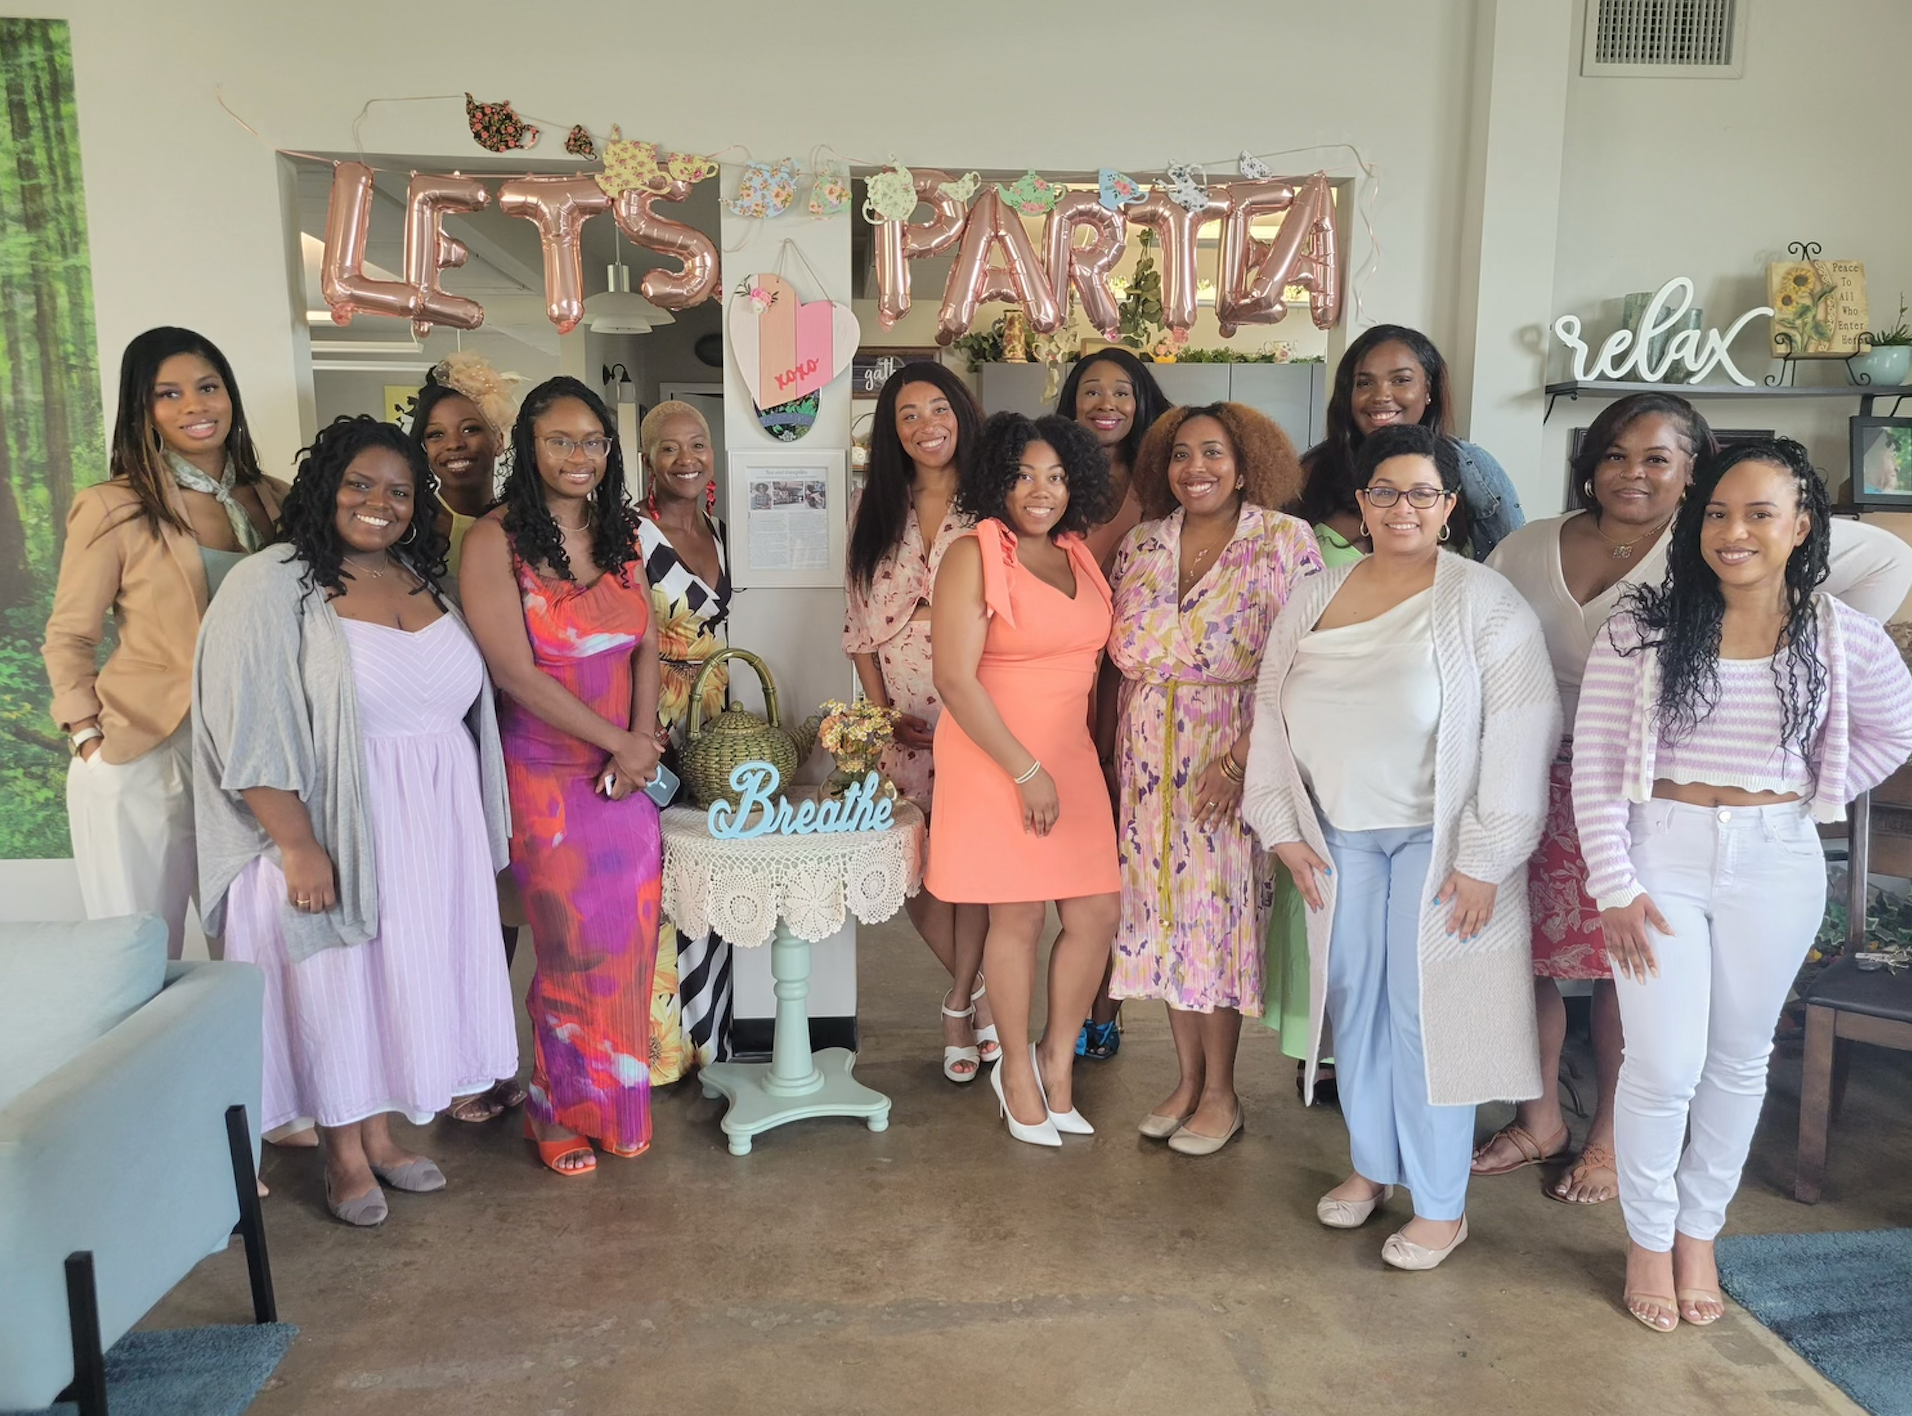 This Dynamic Social Club For Black Women Is All About Authentic Sisterhood, Connection, And Community